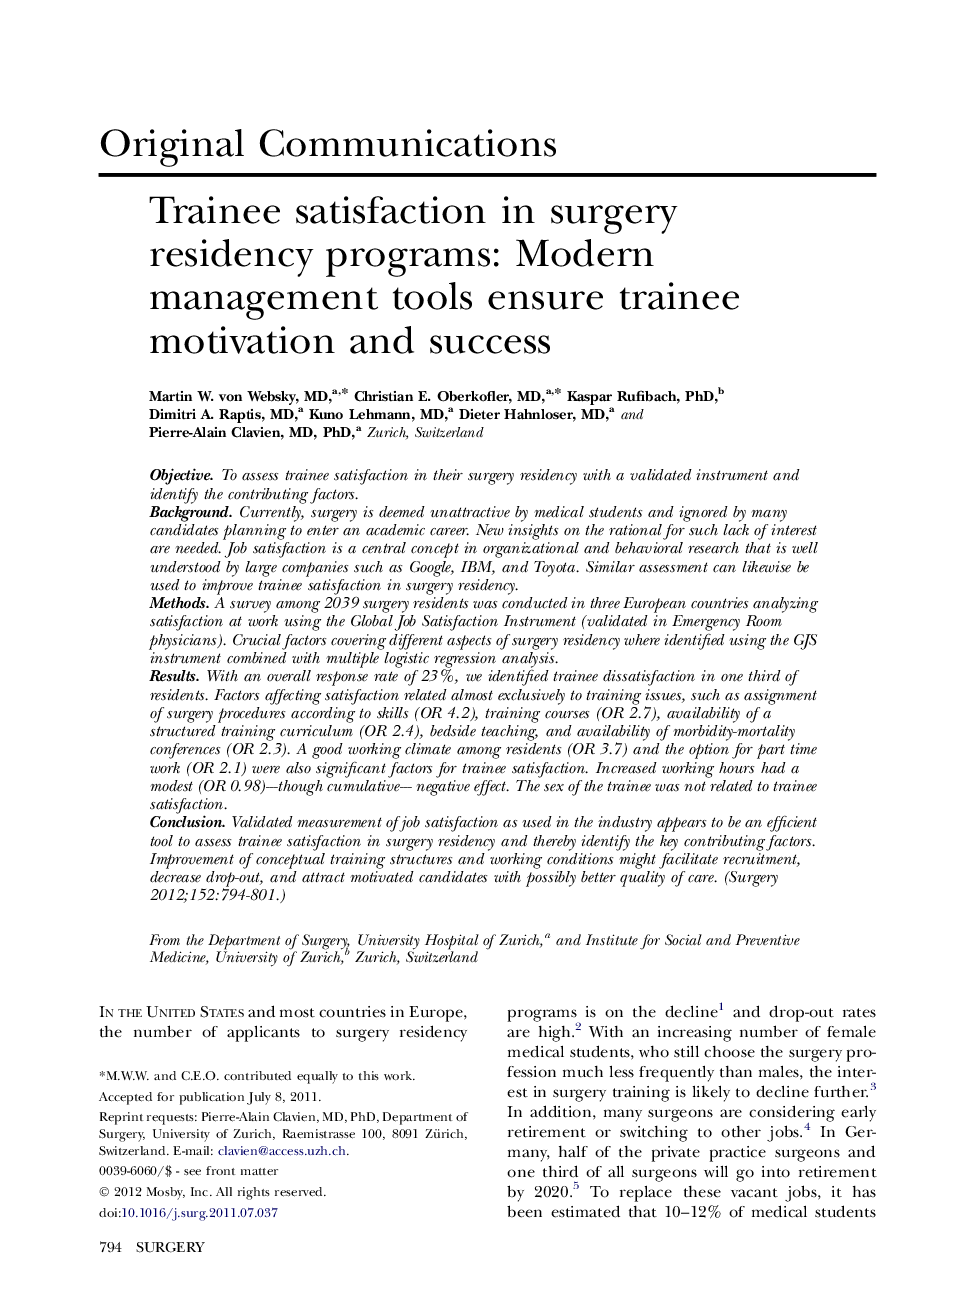 Trainee satisfaction in surgery residency programs: Modern management tools ensure trainee motivation and success